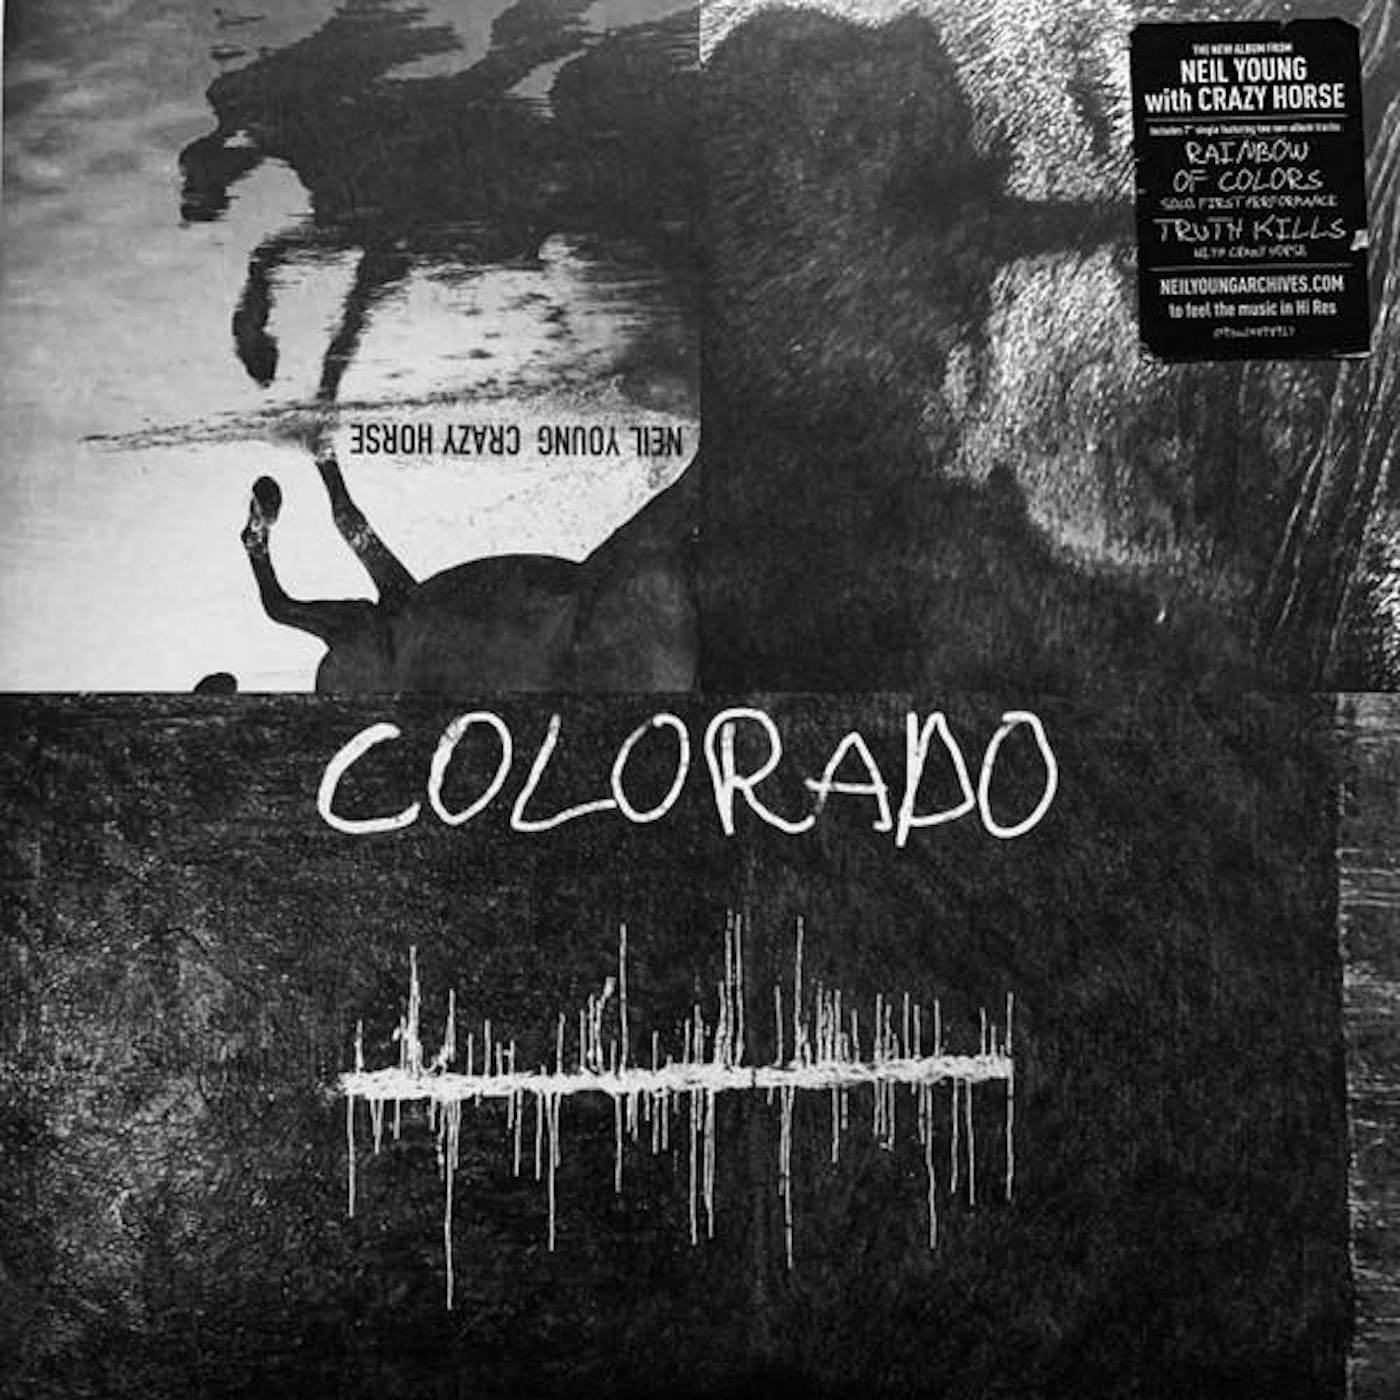 Neil Young & Crazy Horse COLORADO (3-SIDED 2LP/7INCH) Vinyl Record